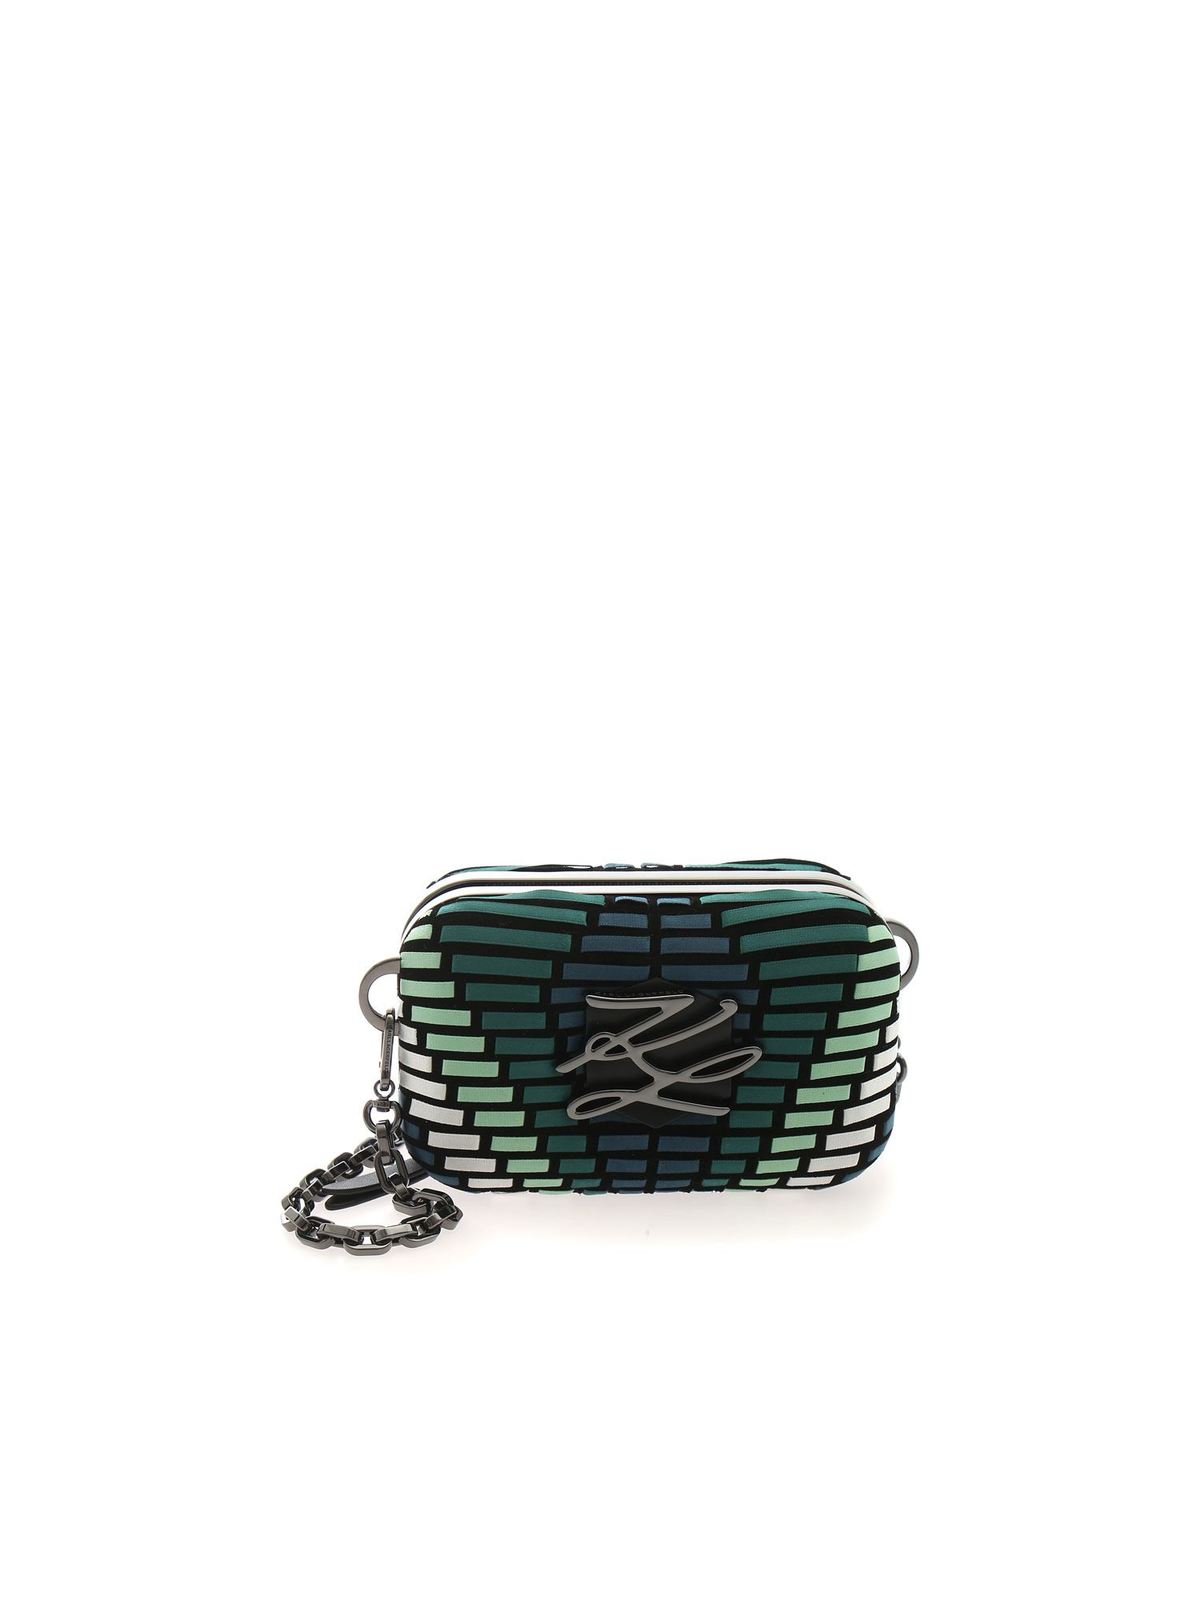 Karl Lagerfeld K/autograph Minaudiere Whip Clutch Bag In Gre In Verde